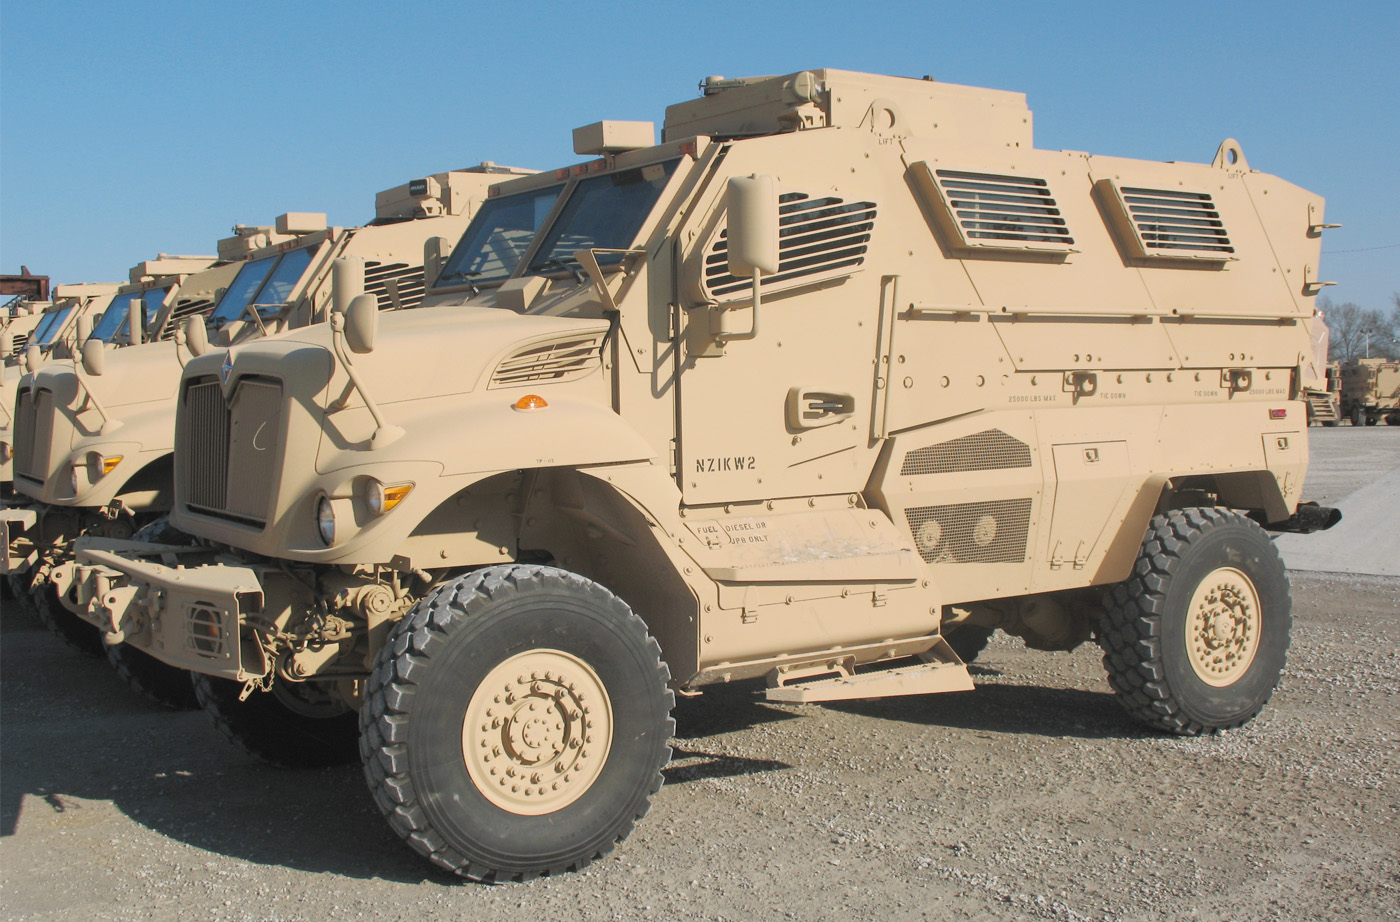 Armored command center vehicle in a parking lot